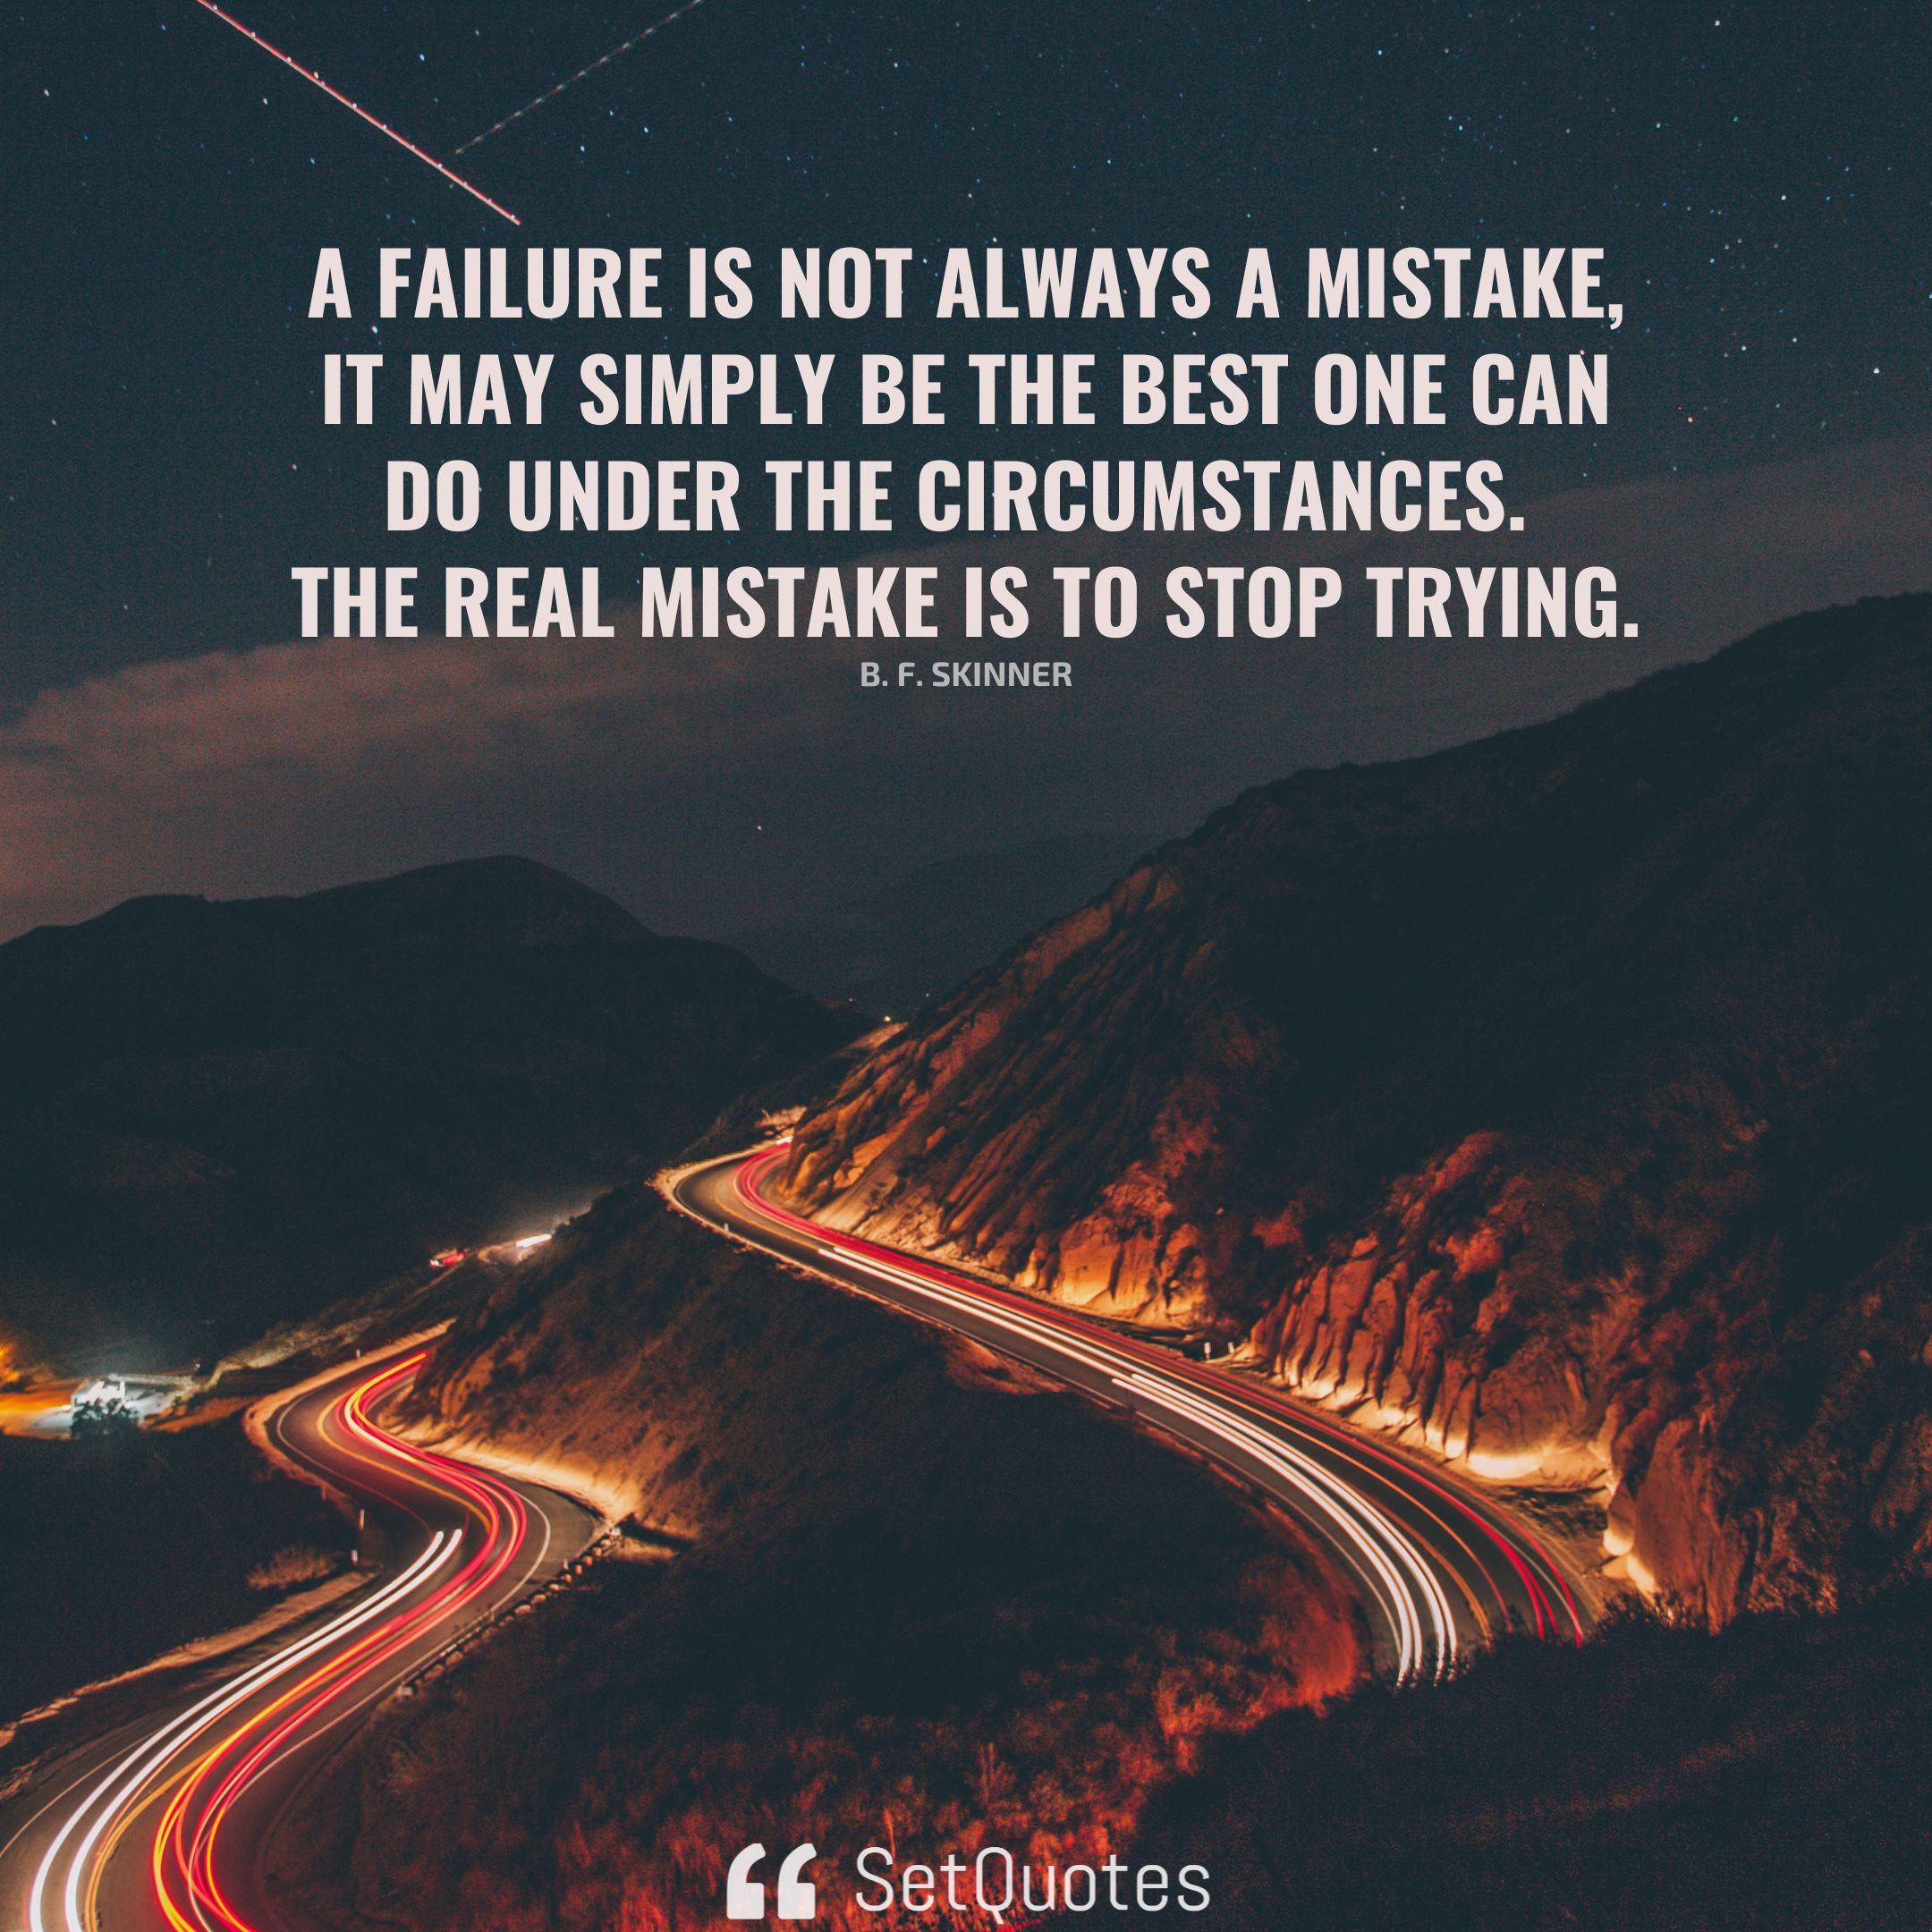 A failure is not always a mistake, it may simply be the best one can do under the circumstances. The real mistake is to stop trying. – B. F. Skinner